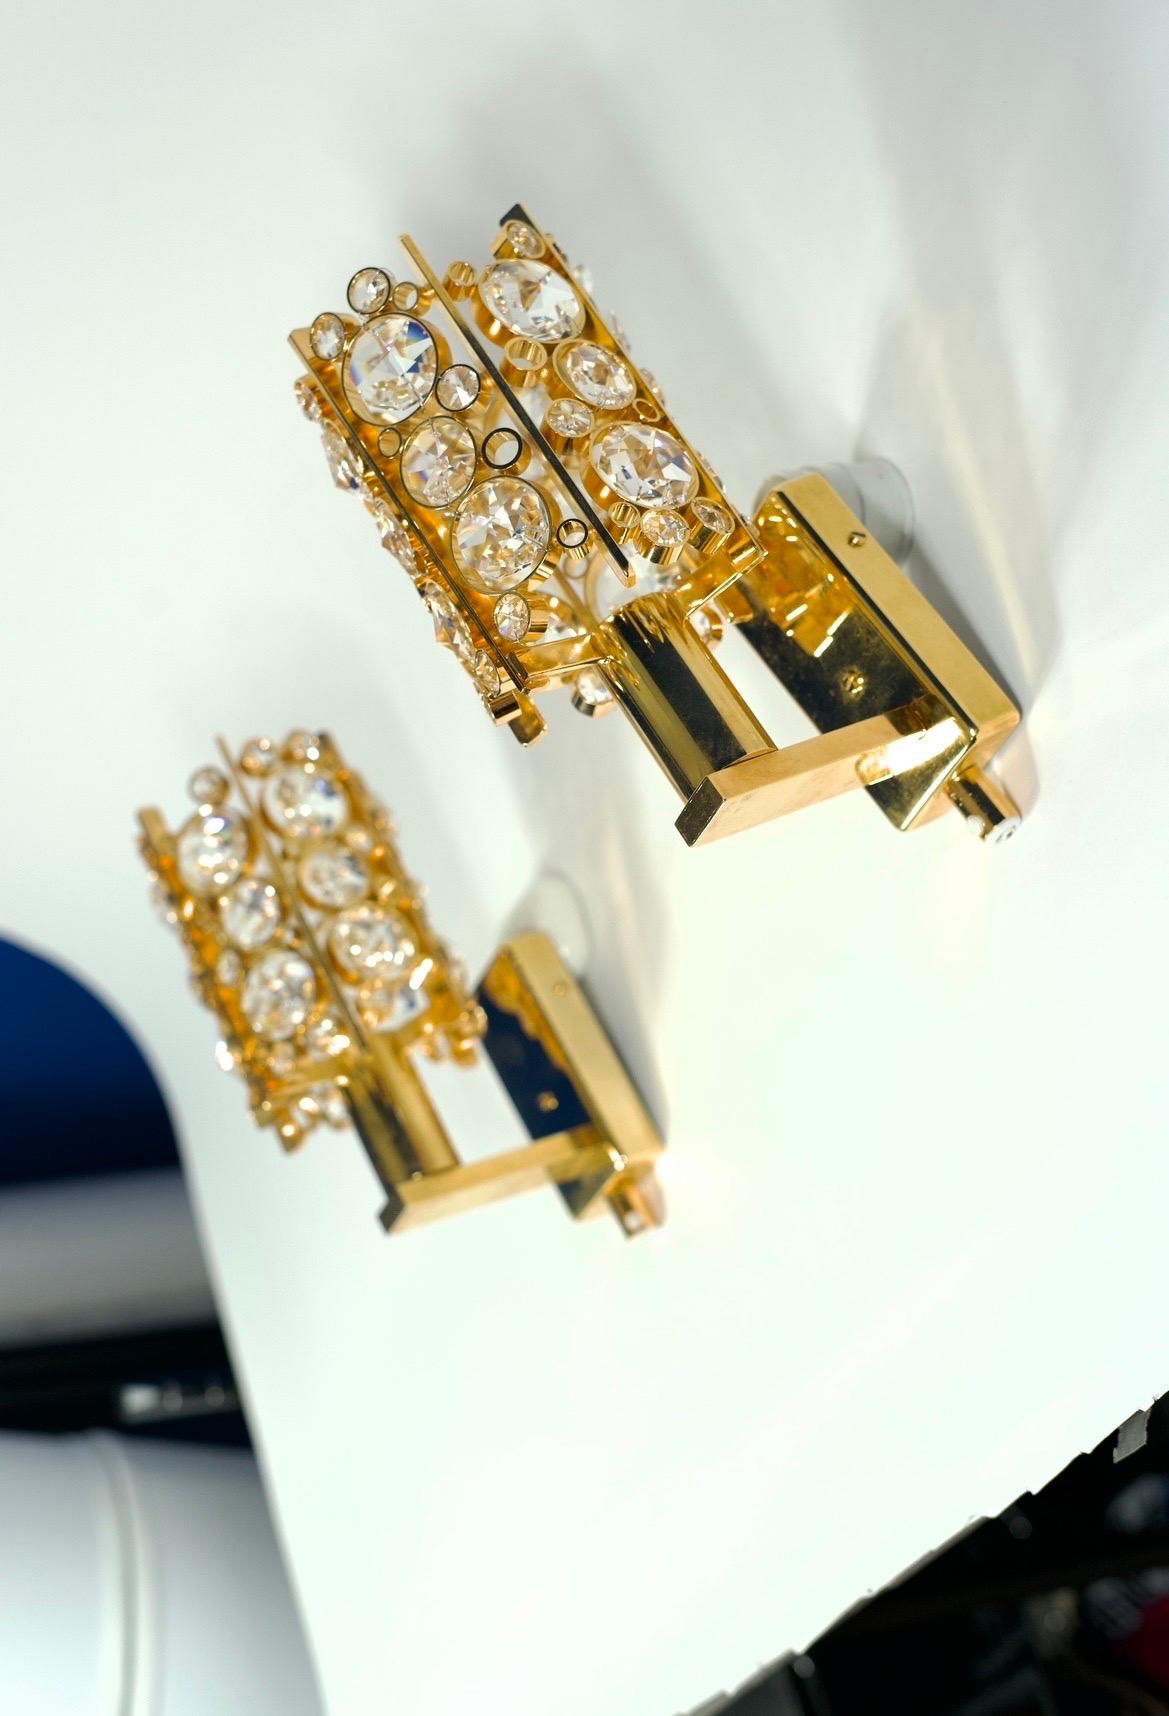 Mid-Century Modern Pair of Palwa Sconces Swarovski Crystals on a Gold-Plated Frame, Vienna, 1960 For Sale